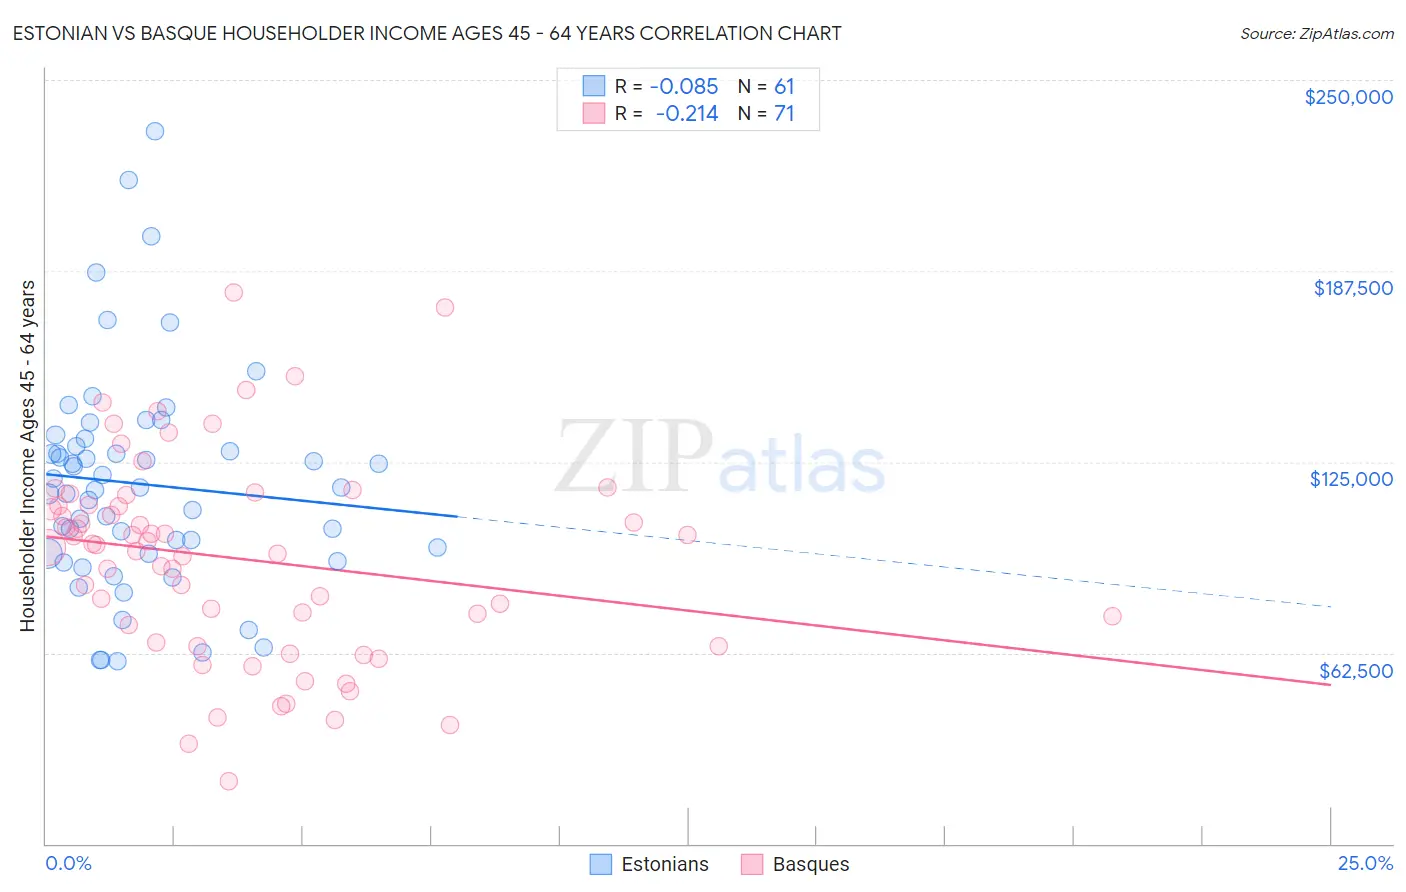 Estonian vs Basque Householder Income Ages 45 - 64 years